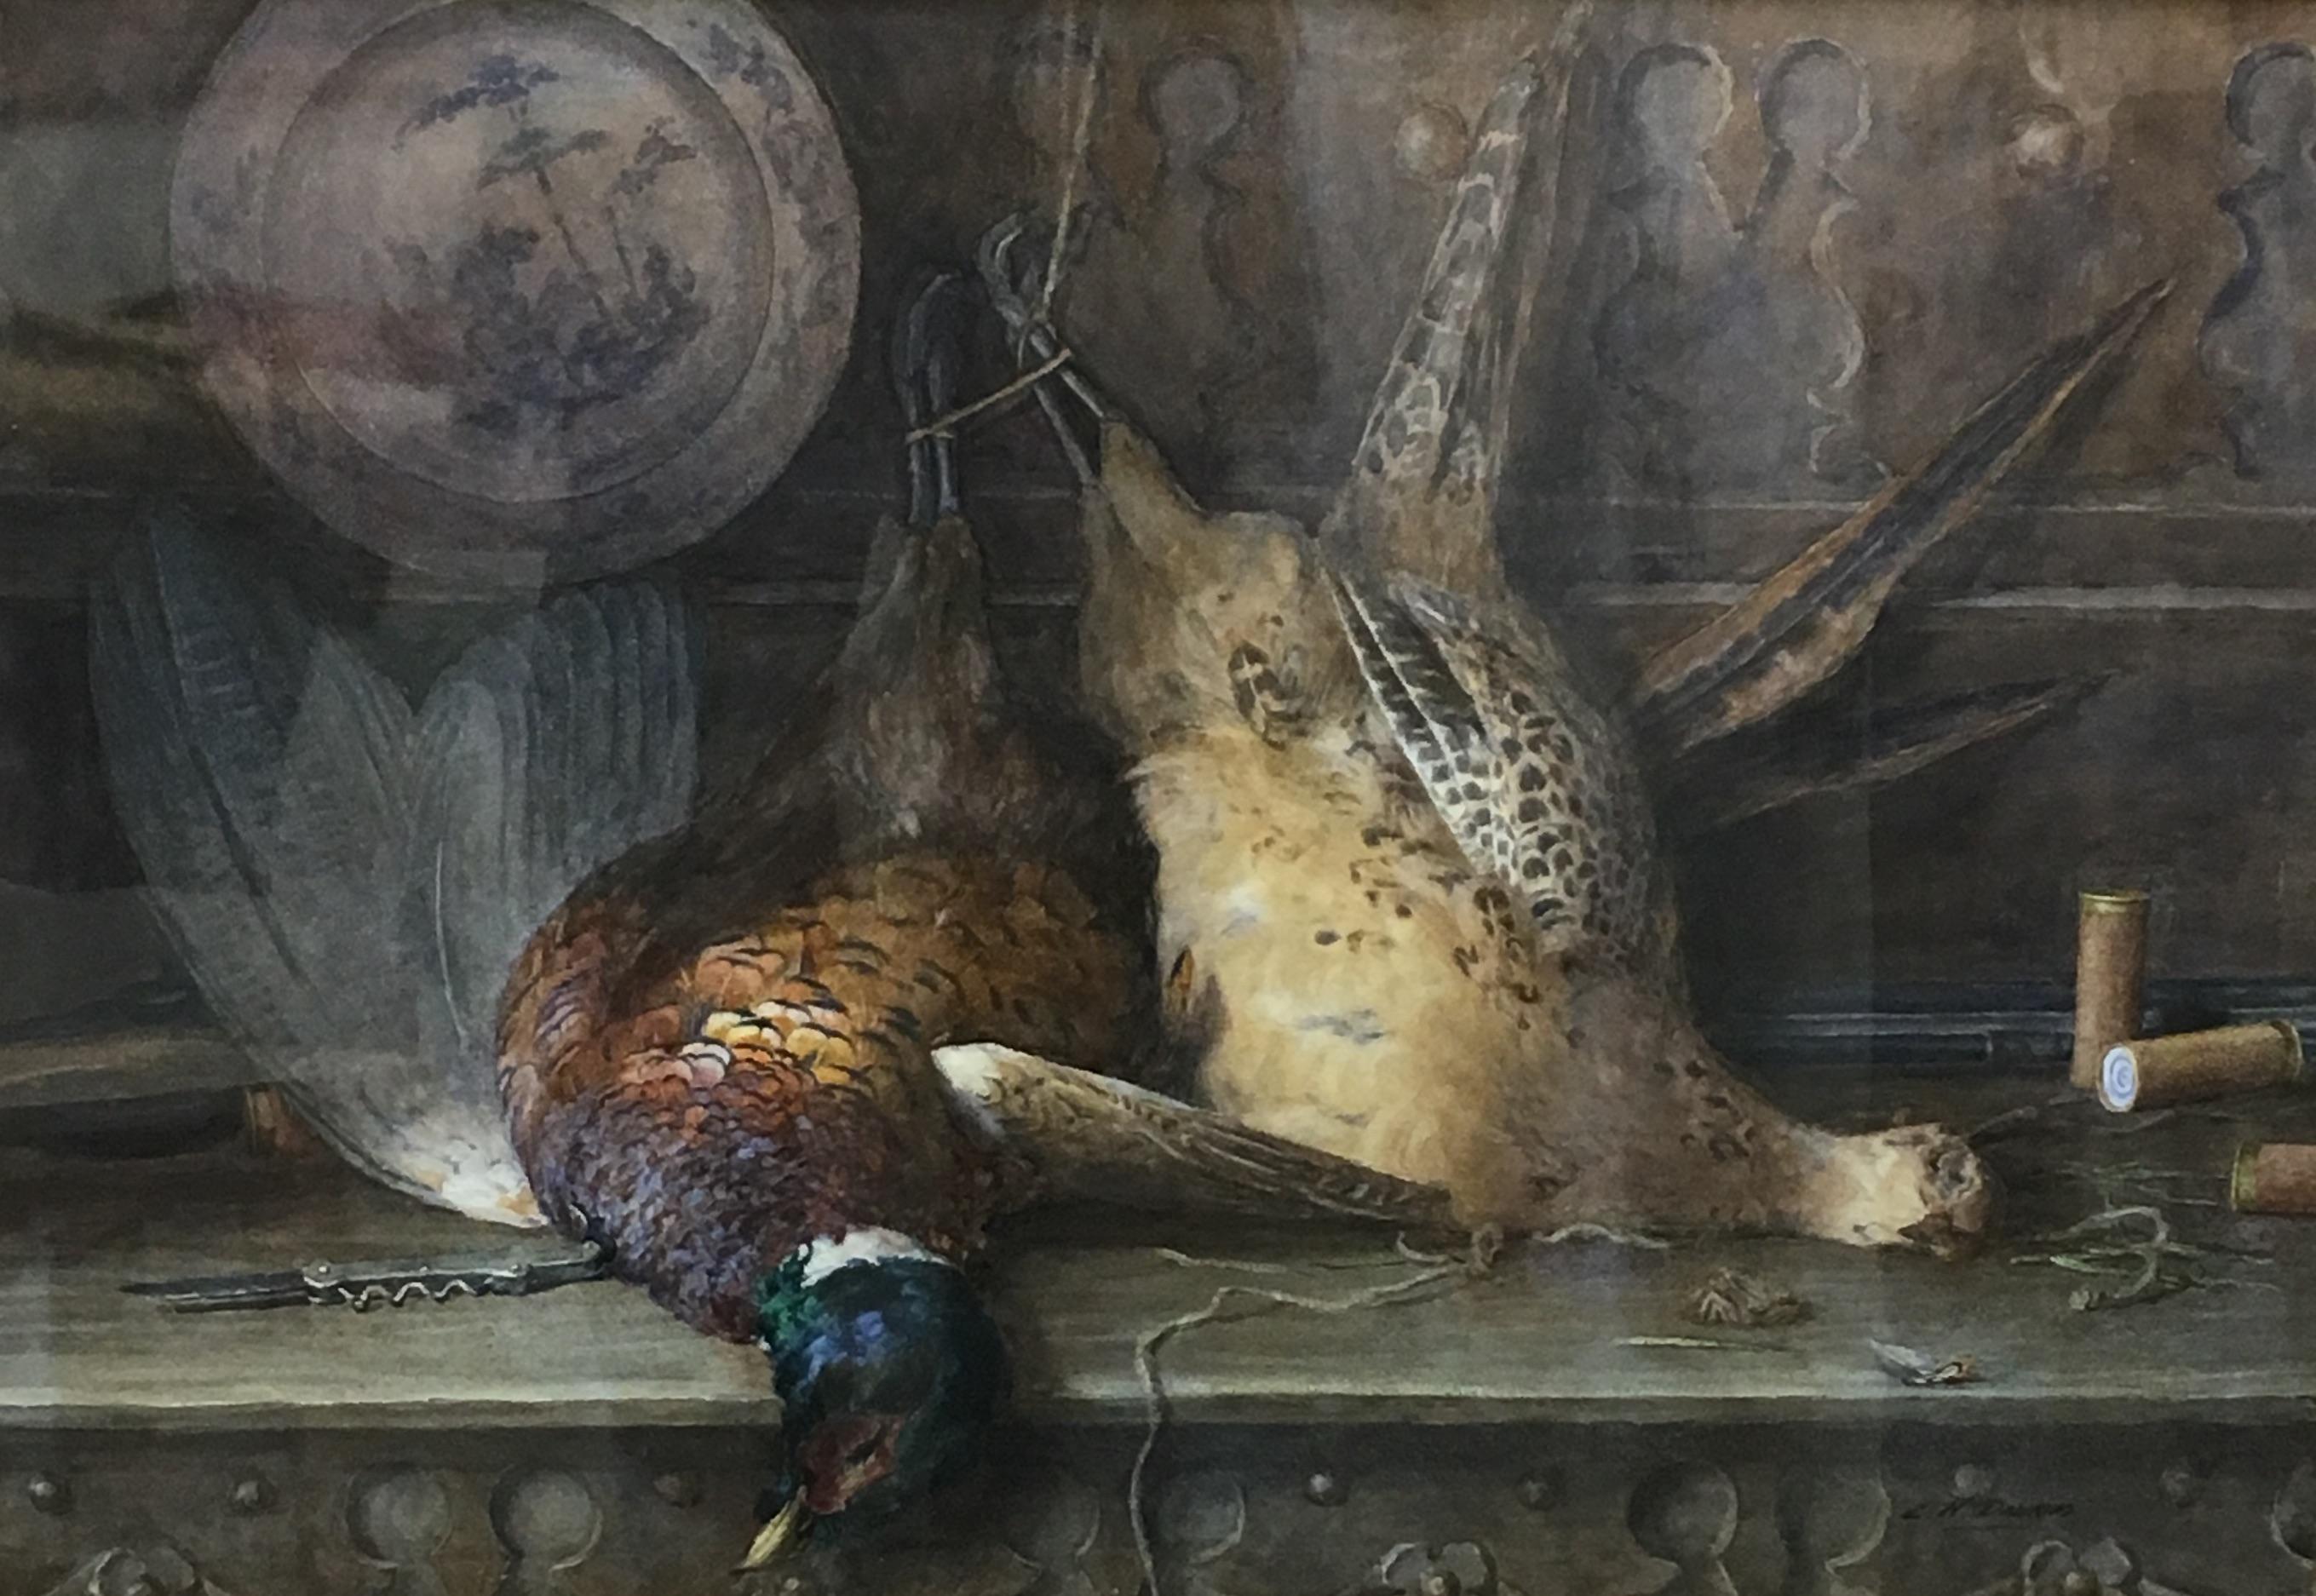 LAURA NORTHCOTE-DAWKINS Exh. 1894-1910

‘A BRACE OF PHEASANTS‘
Watercolor, signed.

Laura Northcote-Dawkins lived and worked in Coventry in the Midlands producing exquisite watercolours of mainly still-life subjects. She exhibited over twenty